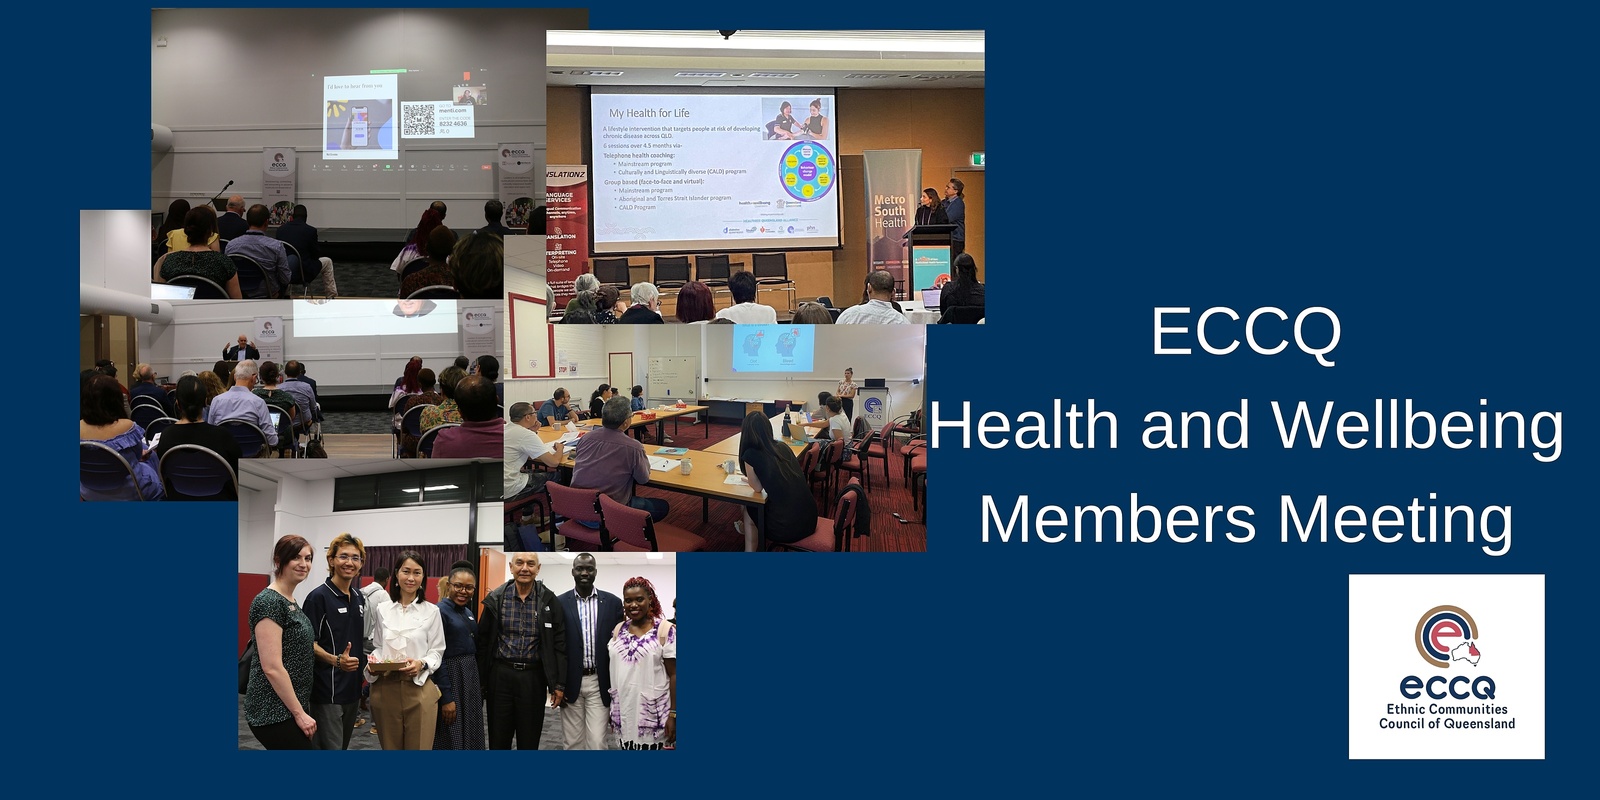 Banner image for ECCQ Members Meeting - Health and Wellbeing